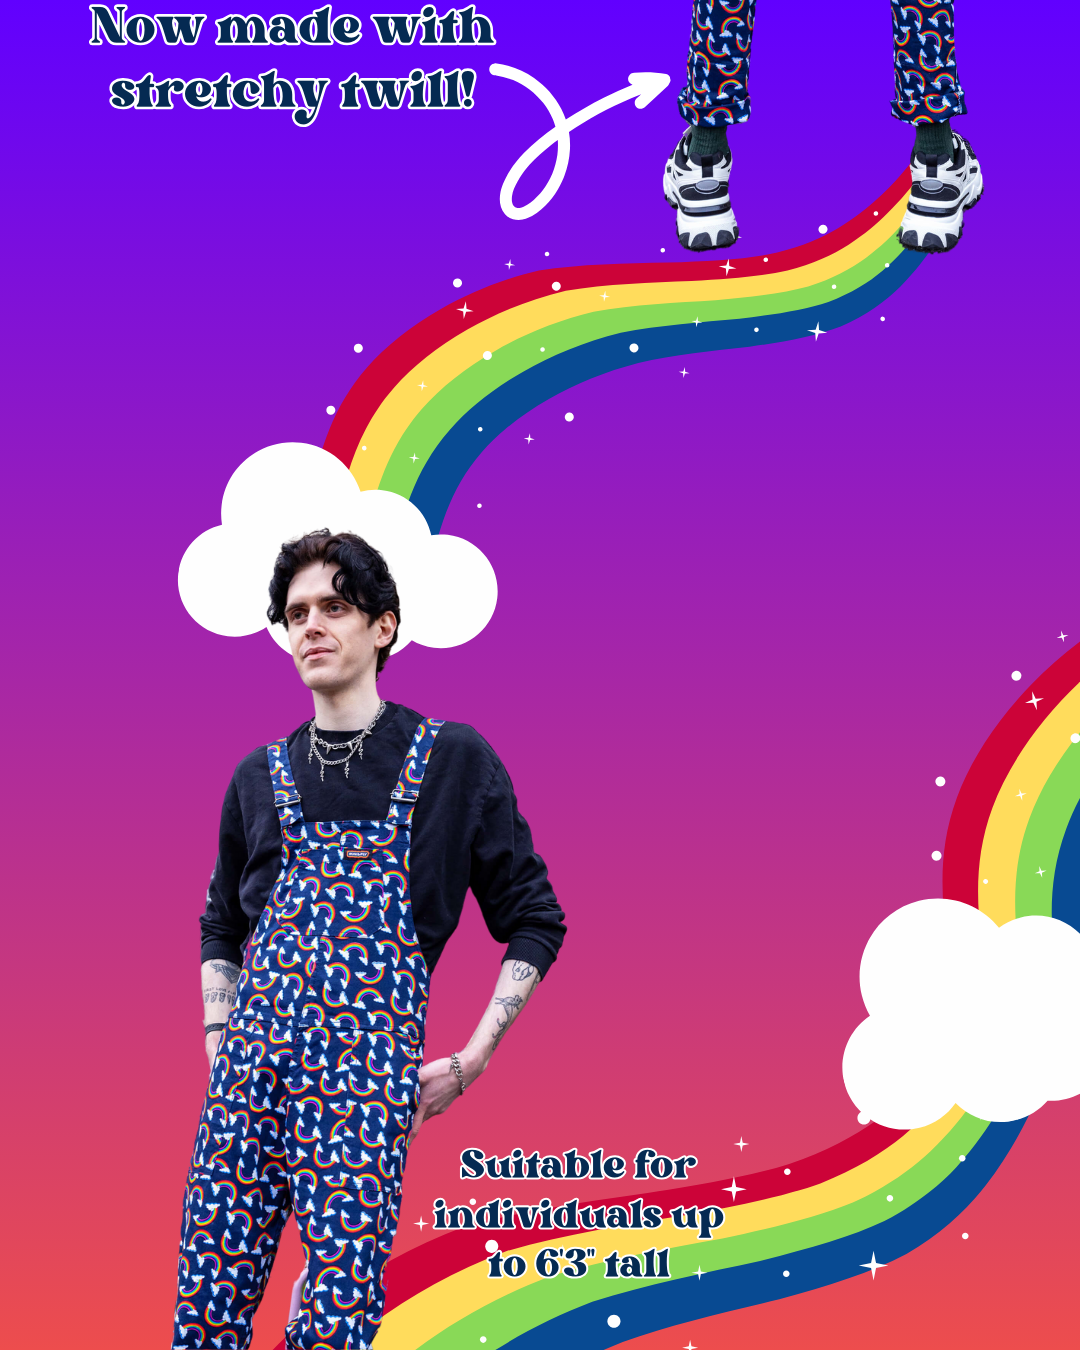 On the left is a male model with dark short hair leaning back with his hands resting on his back pockets and looking off to the left wearing the over the rainbow and clouds stretch twill dungarees from Run & Fly with a long sleeve black top and platform white and black trainers. The background is a purple to red gradient background with sparkly rainbows and clouds with retro style text reading 'now made with stretchy twill!' and 'suitable for individuals up to 6'3" tall'.